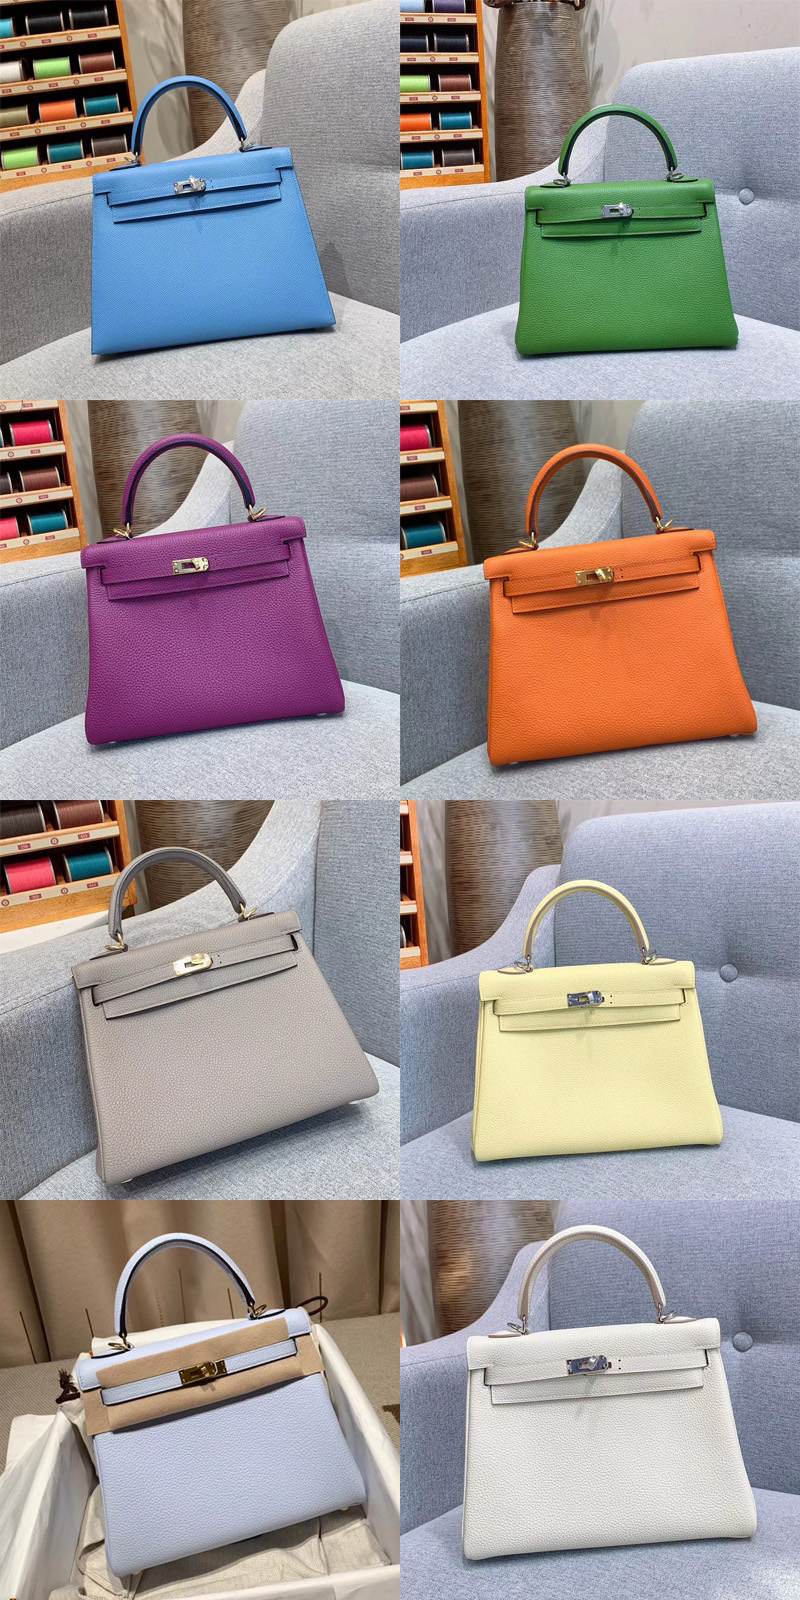 Wholesale Hermes Bag Products at Factory Prices from Manufacturers in  China, India, Korea, etc.